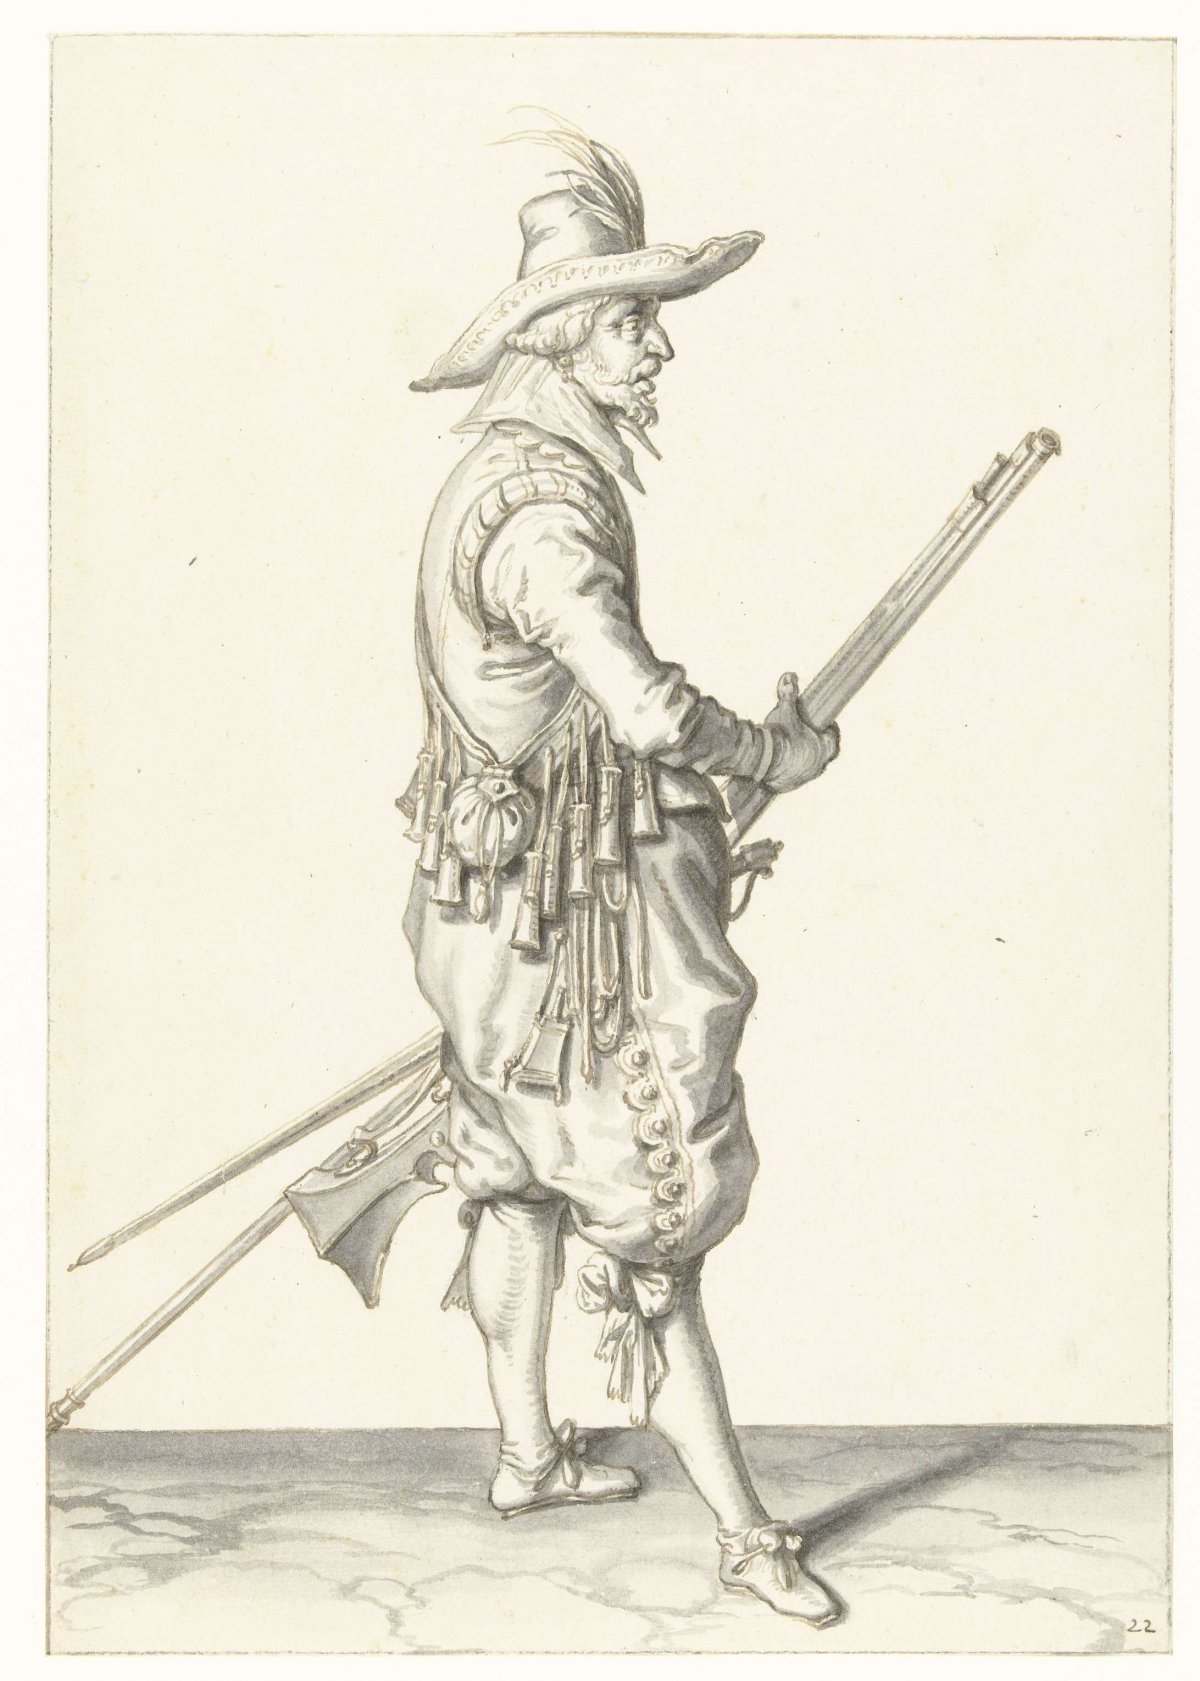 Soldier holding his musket with both hands by his left thigh, Jacques de Gheyn (II), 1596 - 1606